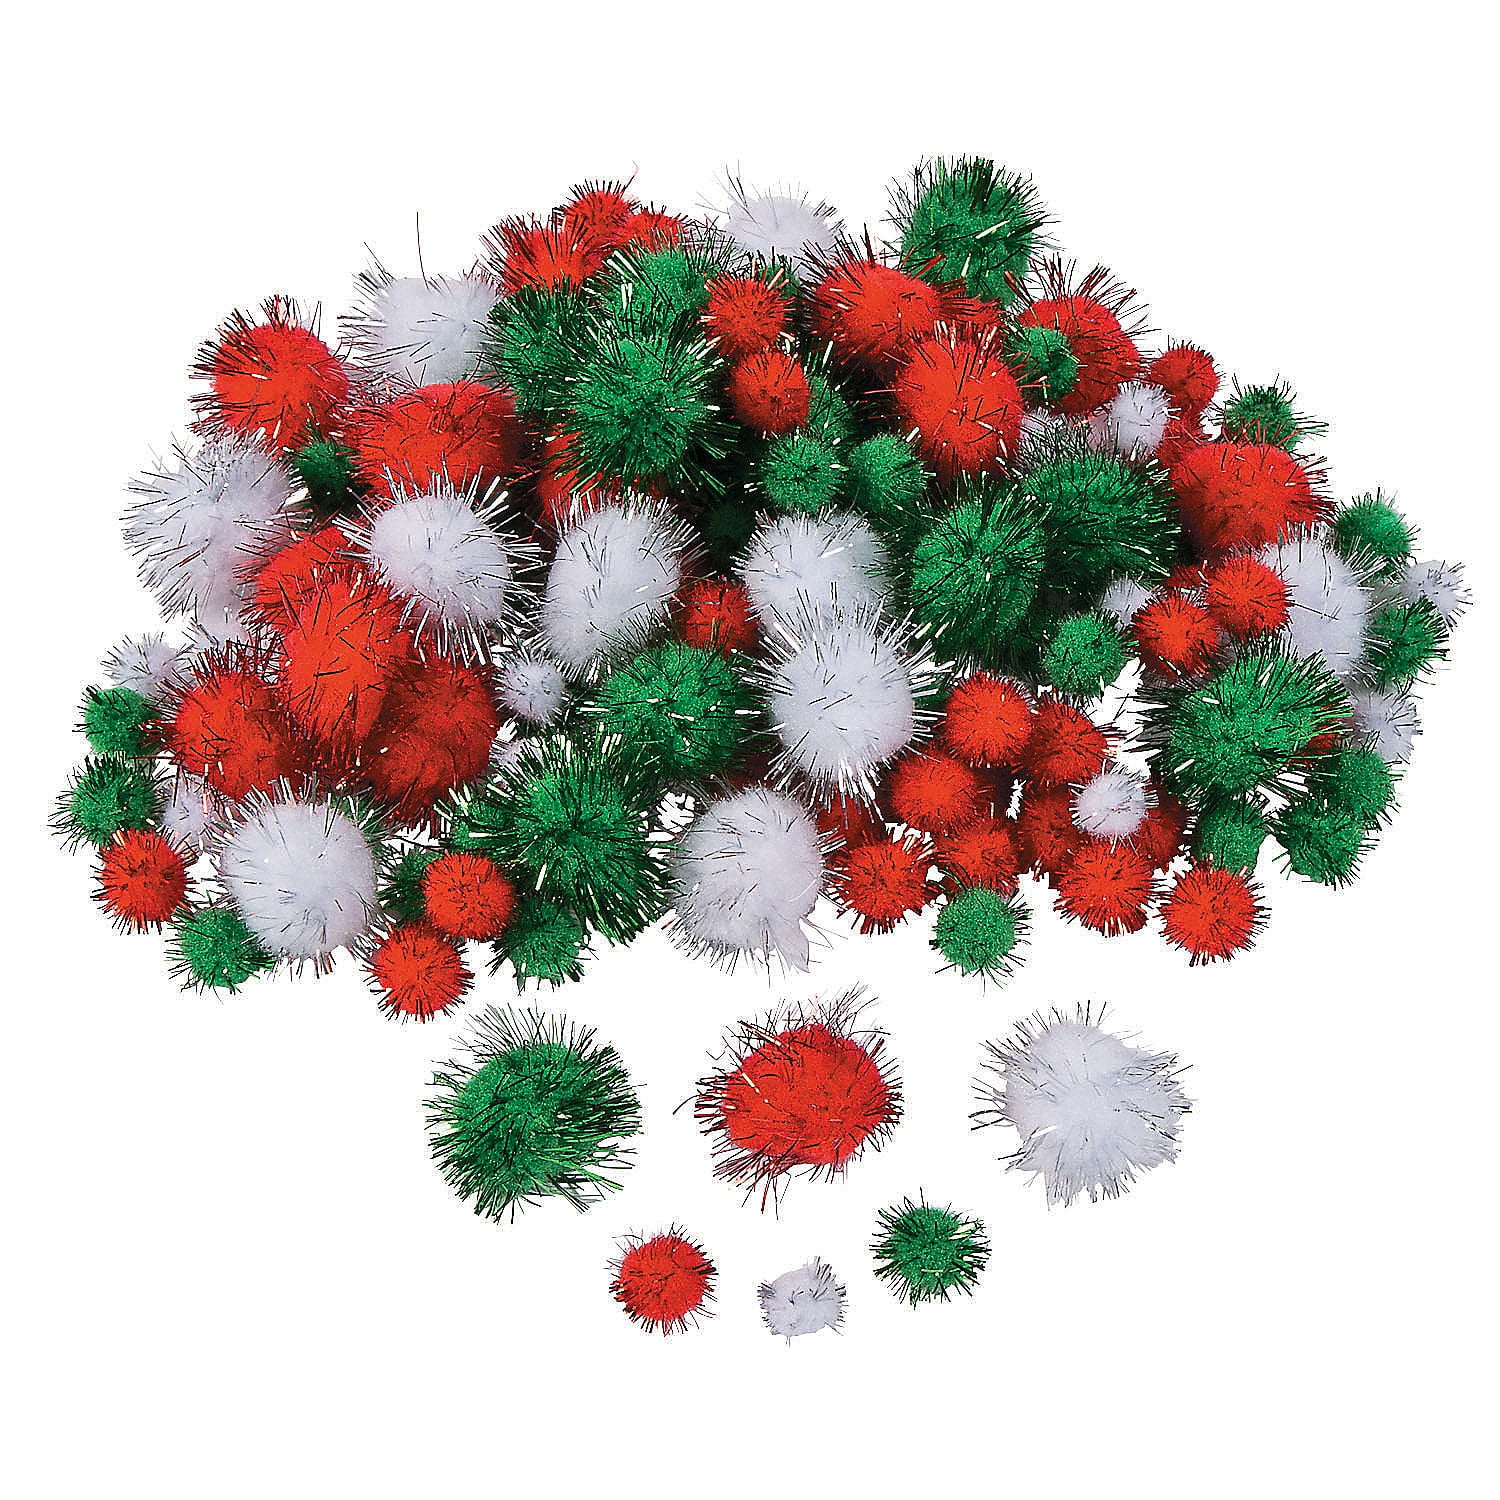  EXCEART 200pcs 1 Pack Christmas Party Favors Pompoms for Crafts  Pom Pom Garland Pet Cat Toy Pom Pom Christmas Pipe Cleaners Glitter  Chenille Stems Pom Pom Material Fluffy Christmas Tree 